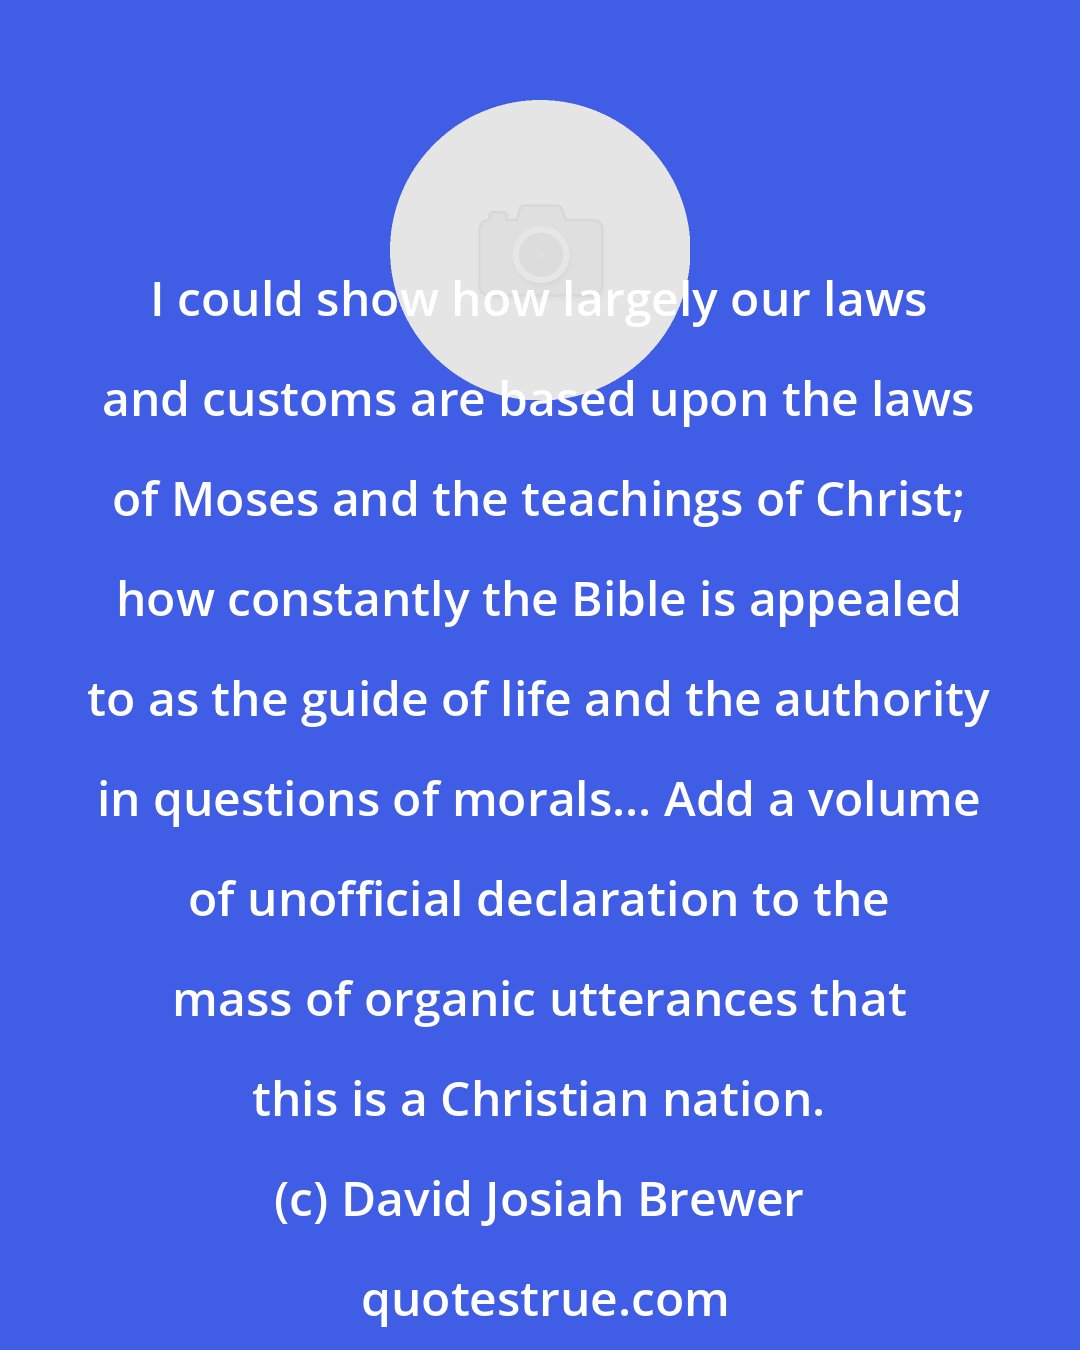 David Josiah Brewer: I could show how largely our laws and customs are based upon the laws of Moses and the teachings of Christ; how constantly the Bible is appealed to as the guide of life and the authority in questions of morals... Add a volume of unofficial declaration to the mass of organic utterances that this is a Christian nation.